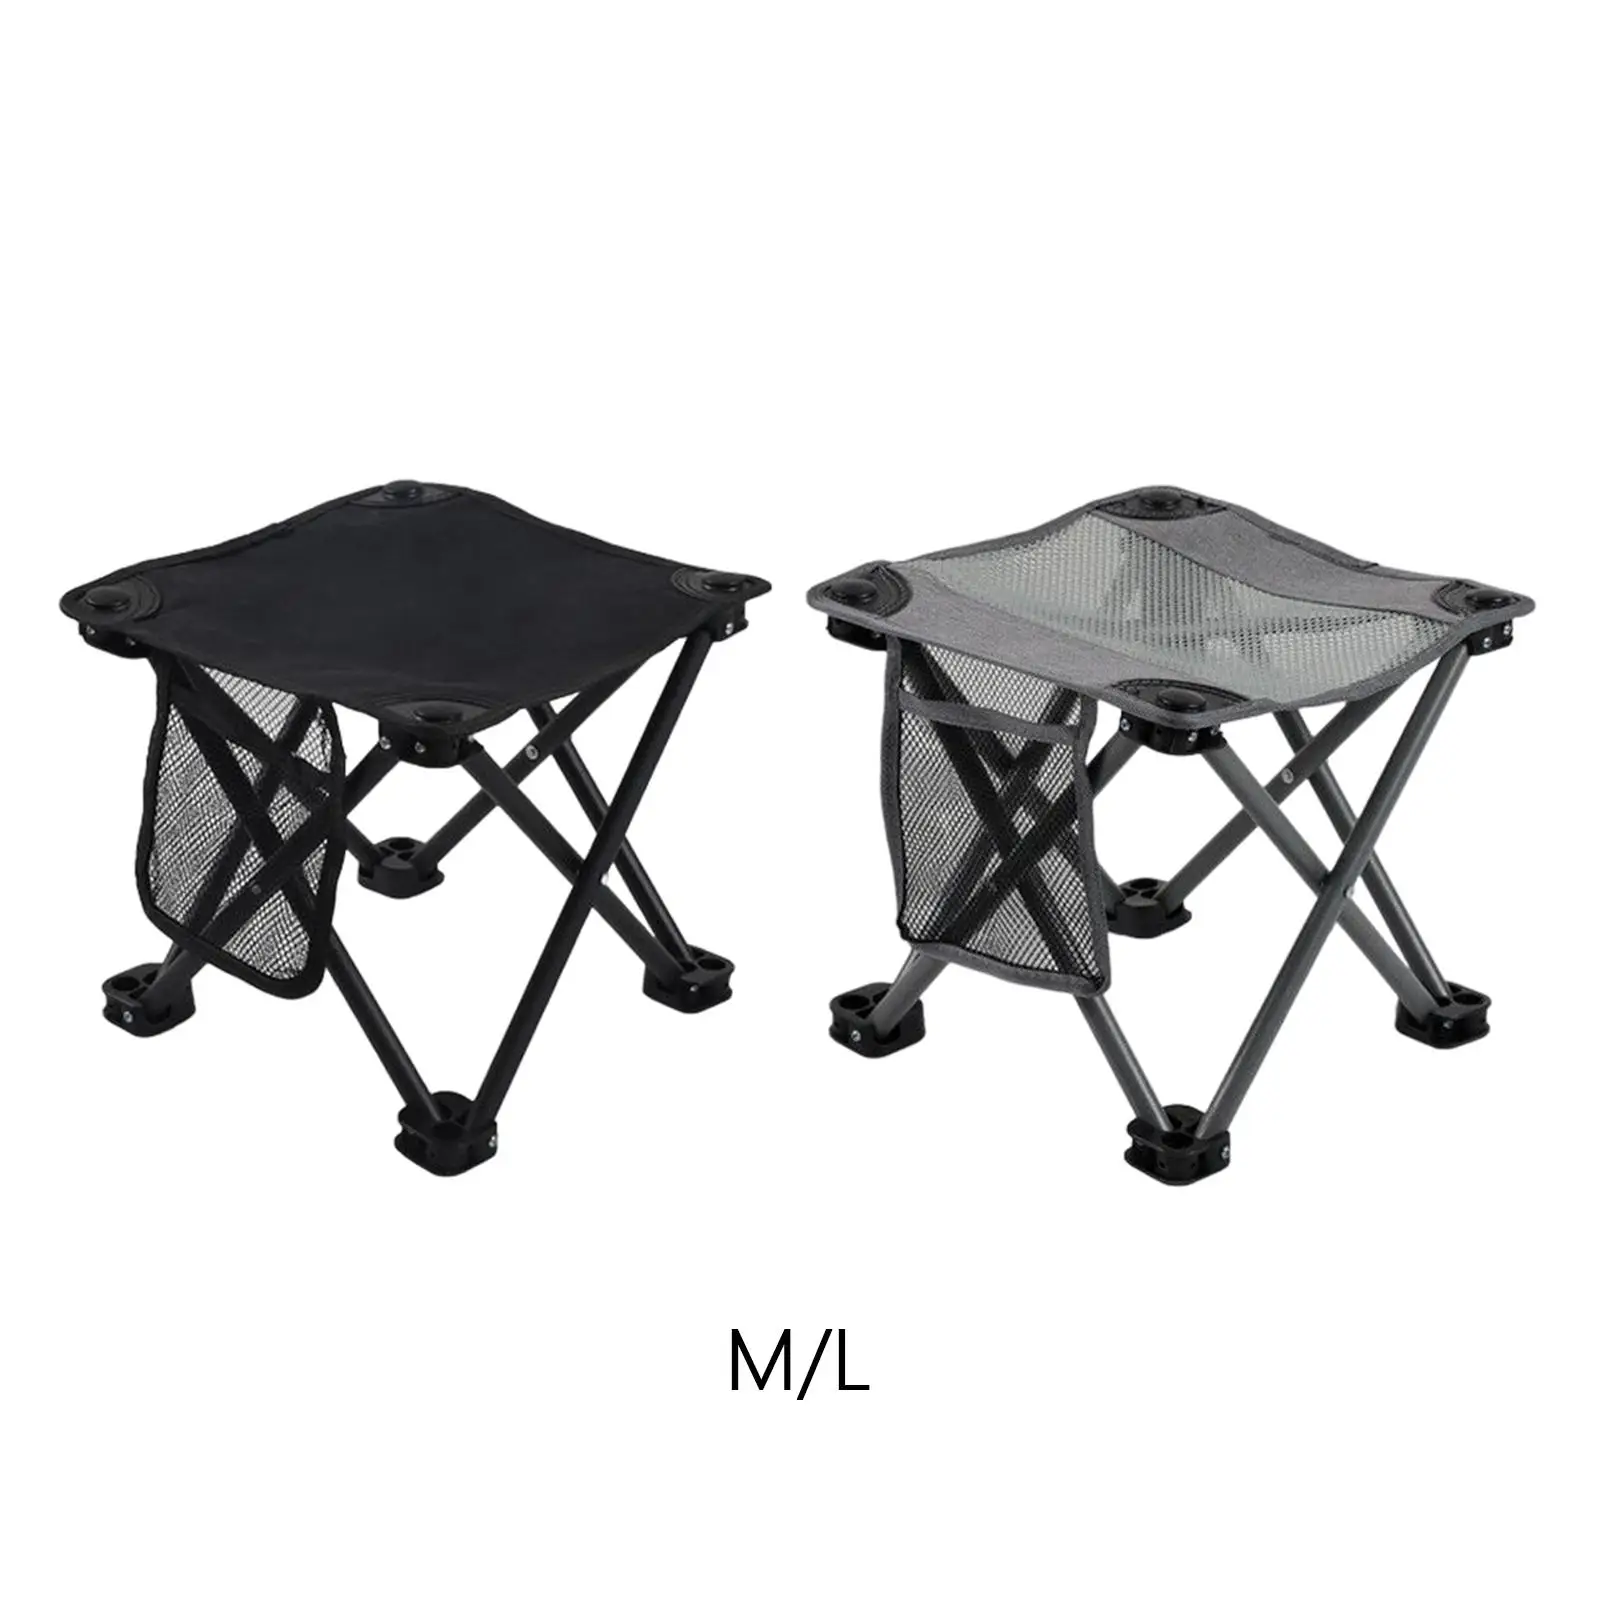 Camping Stool Retractable Foot Stool Lightweight Foldable Fishing Chair Anti Slip Folding Chair for Camping BBQ Picnic Outdoor